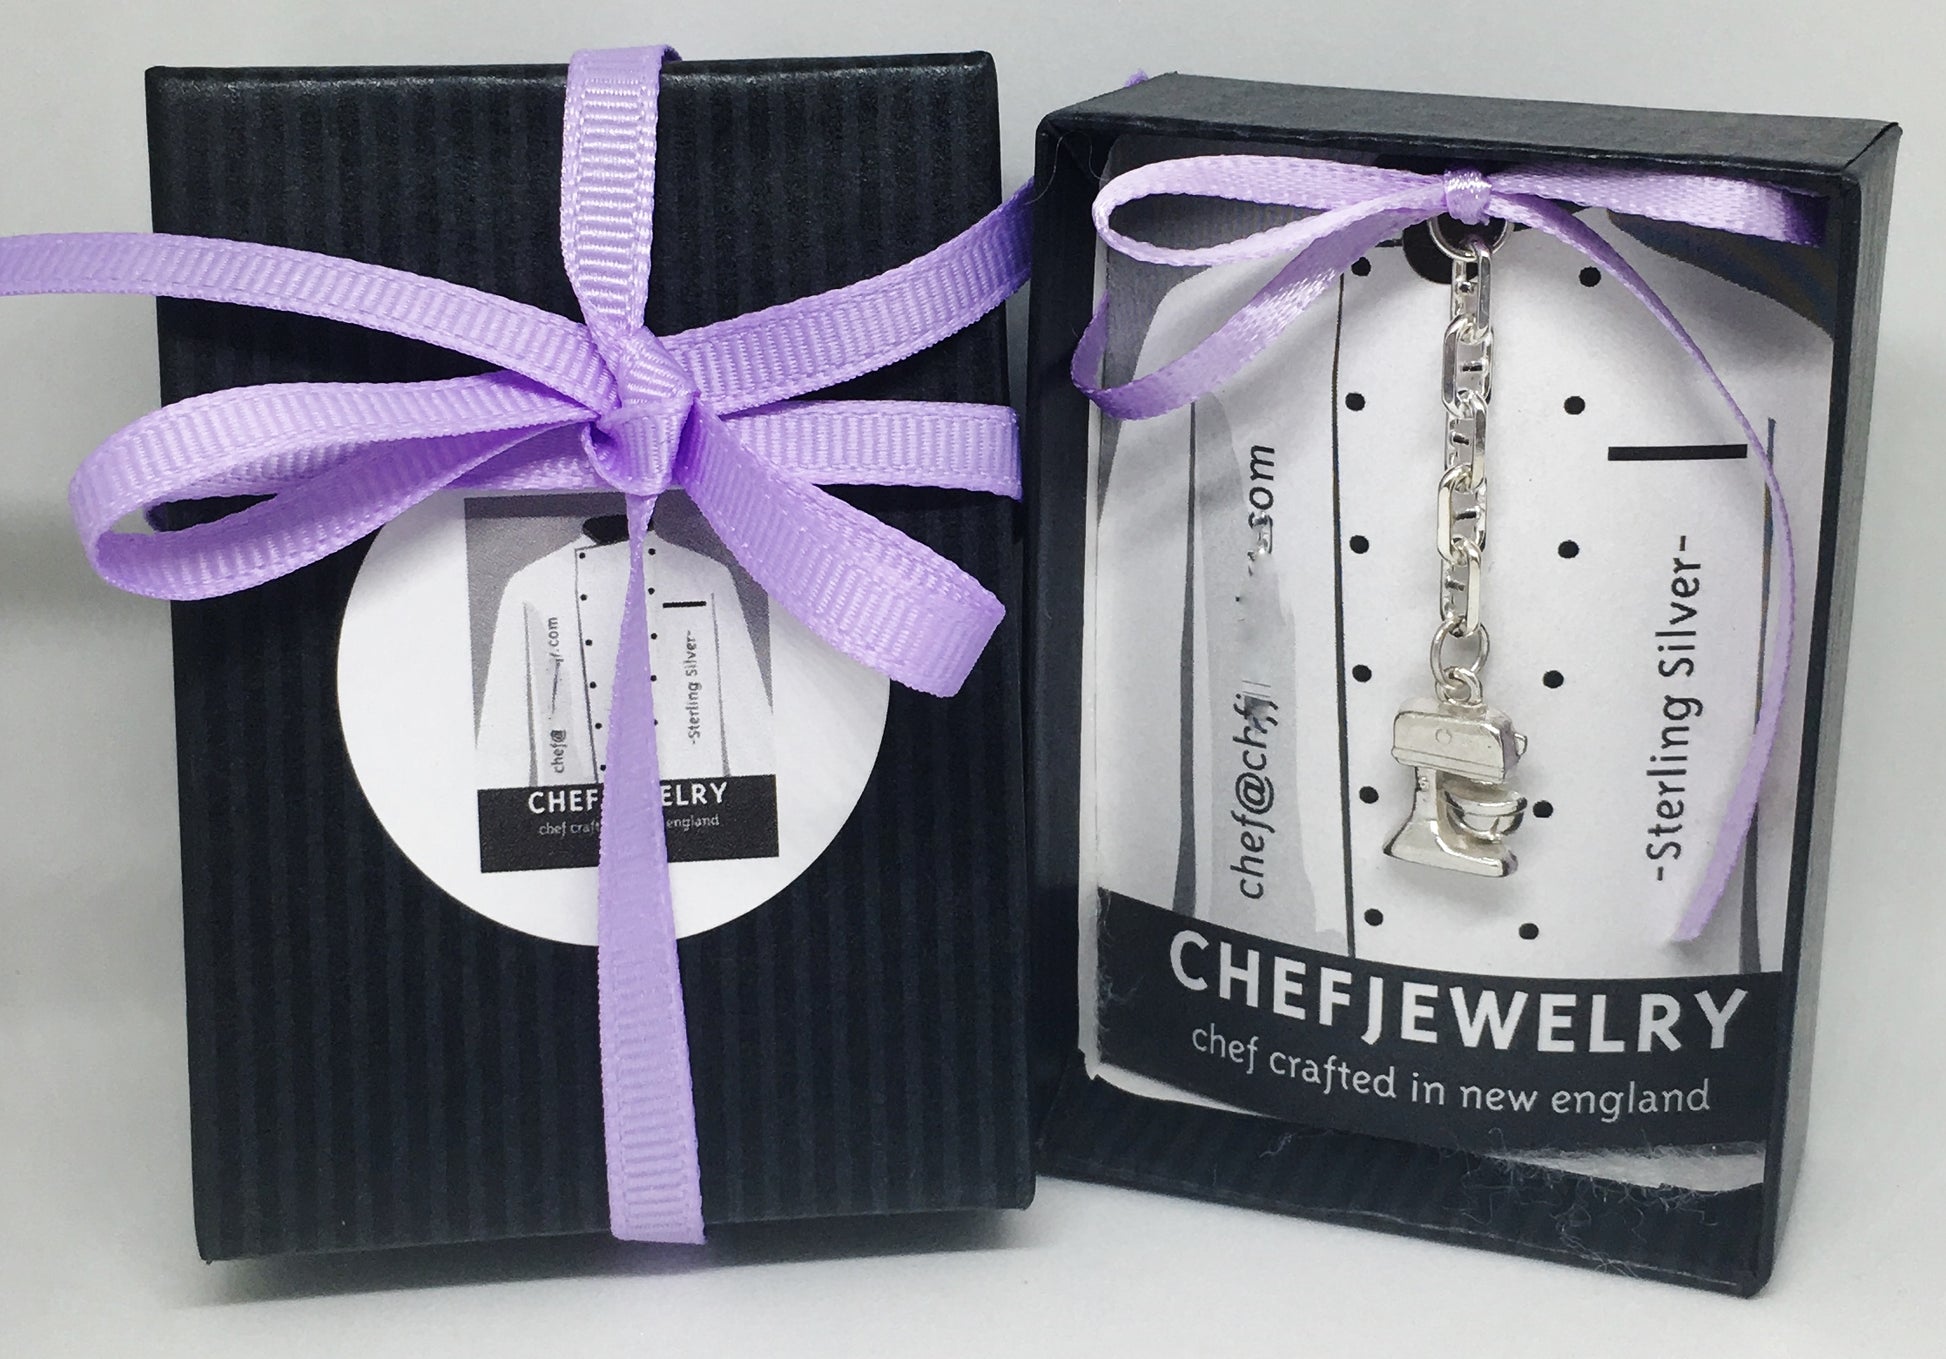 Your chef earrings will arrive in custom ChefJewelry packaging